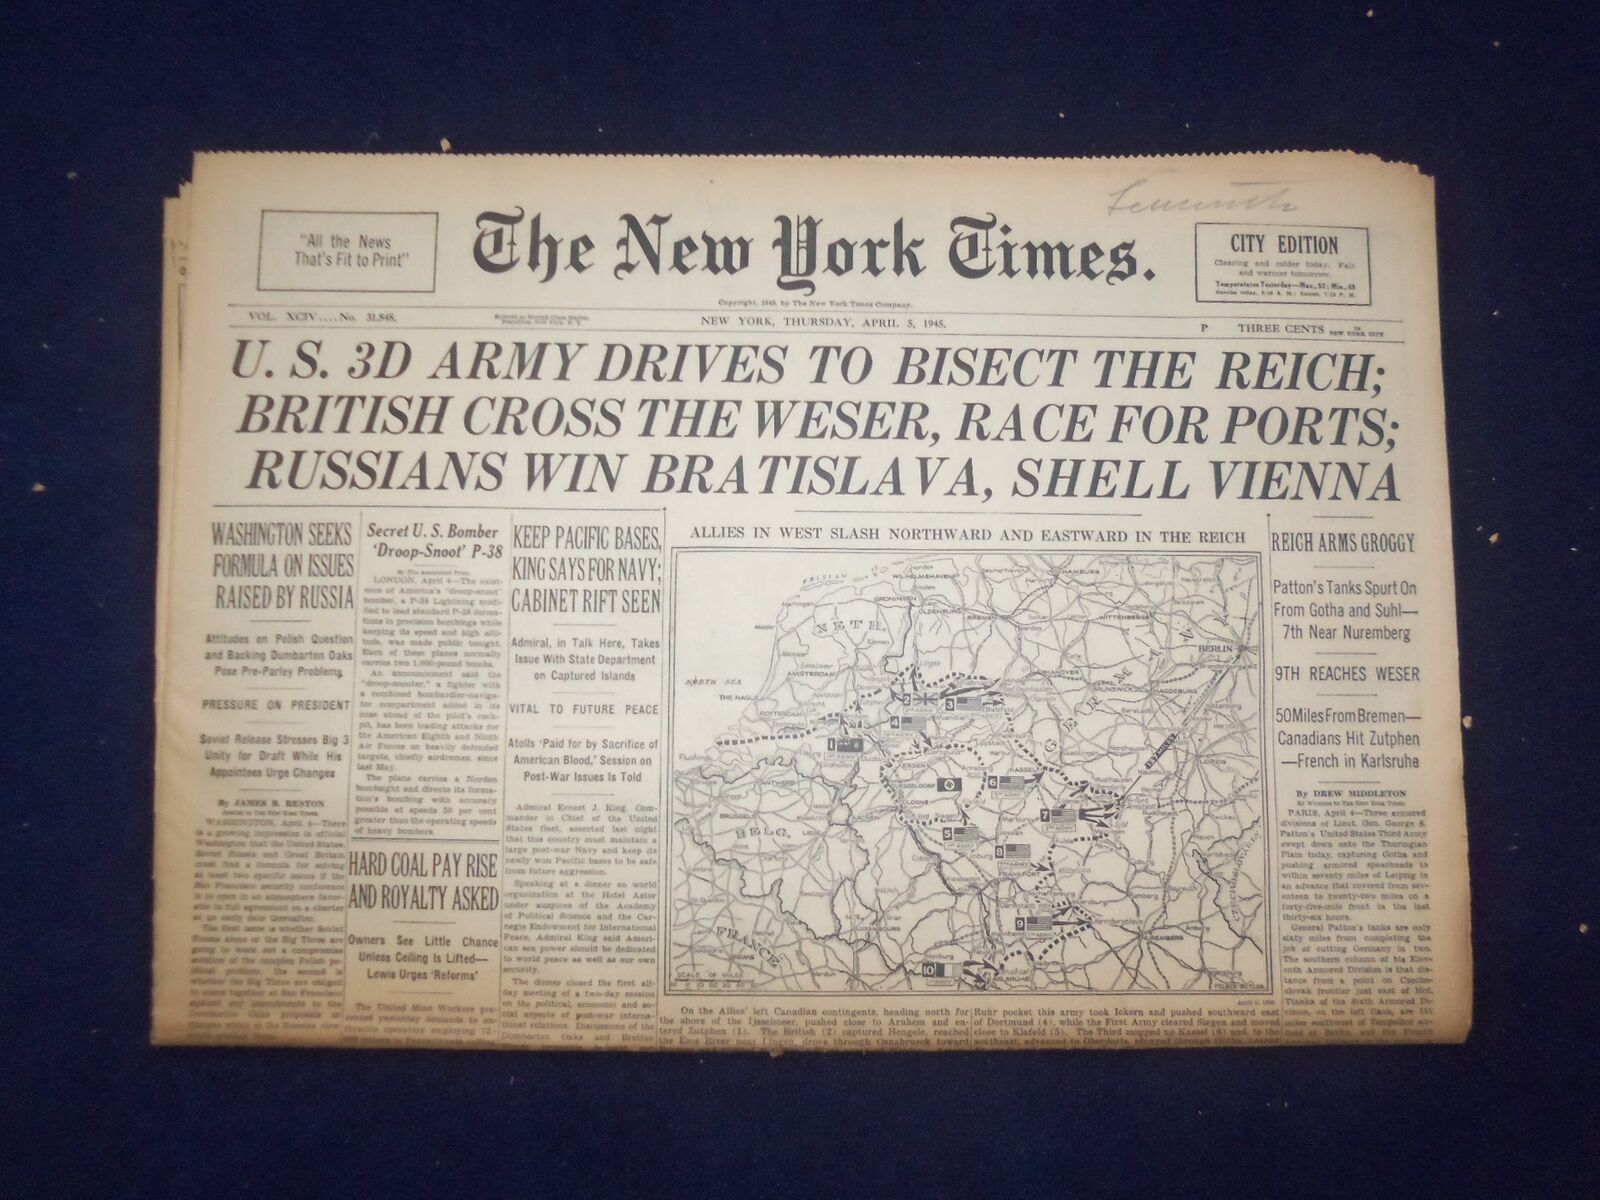 1945 APRIL 5 NEW YORK TIMES - U.S. 3DARMY DRIVES TO BISECT THE REICH - NP 6686